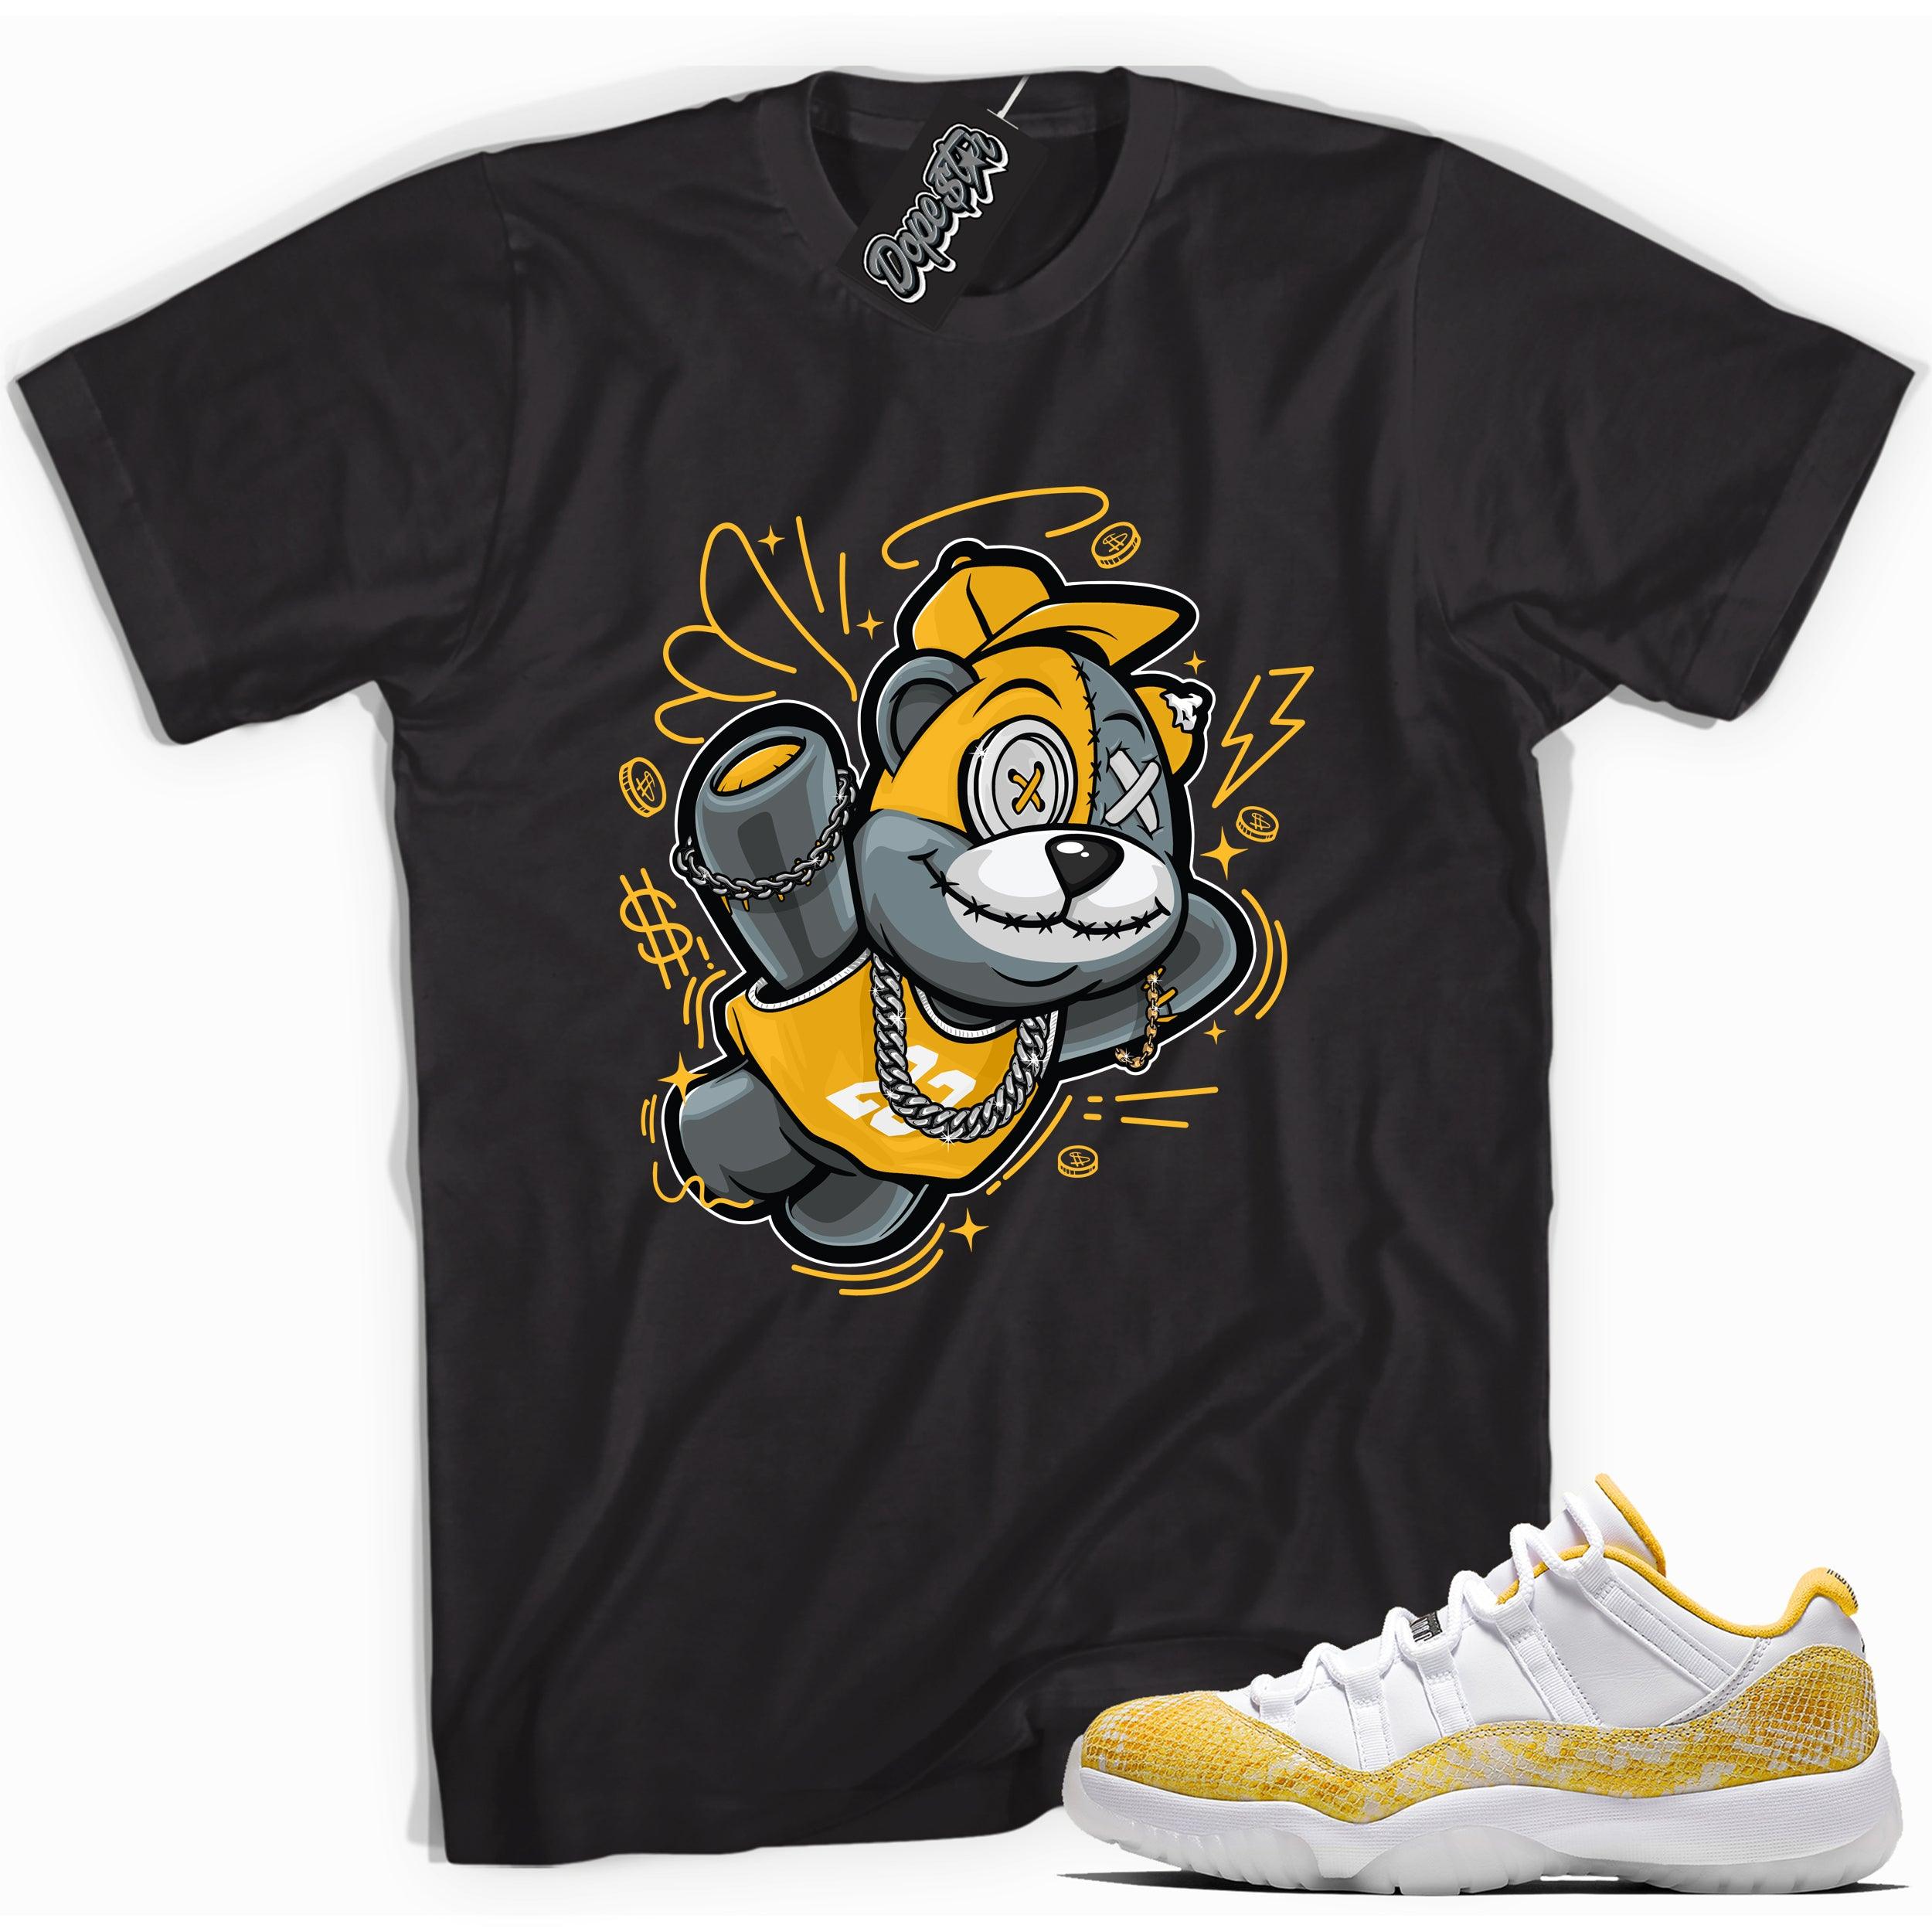 Cool black graphic tee with 'slam dunk bear' print, that perfectly matches  Air Jordan 11 Retro Low Yellow Snakeskin sneakers